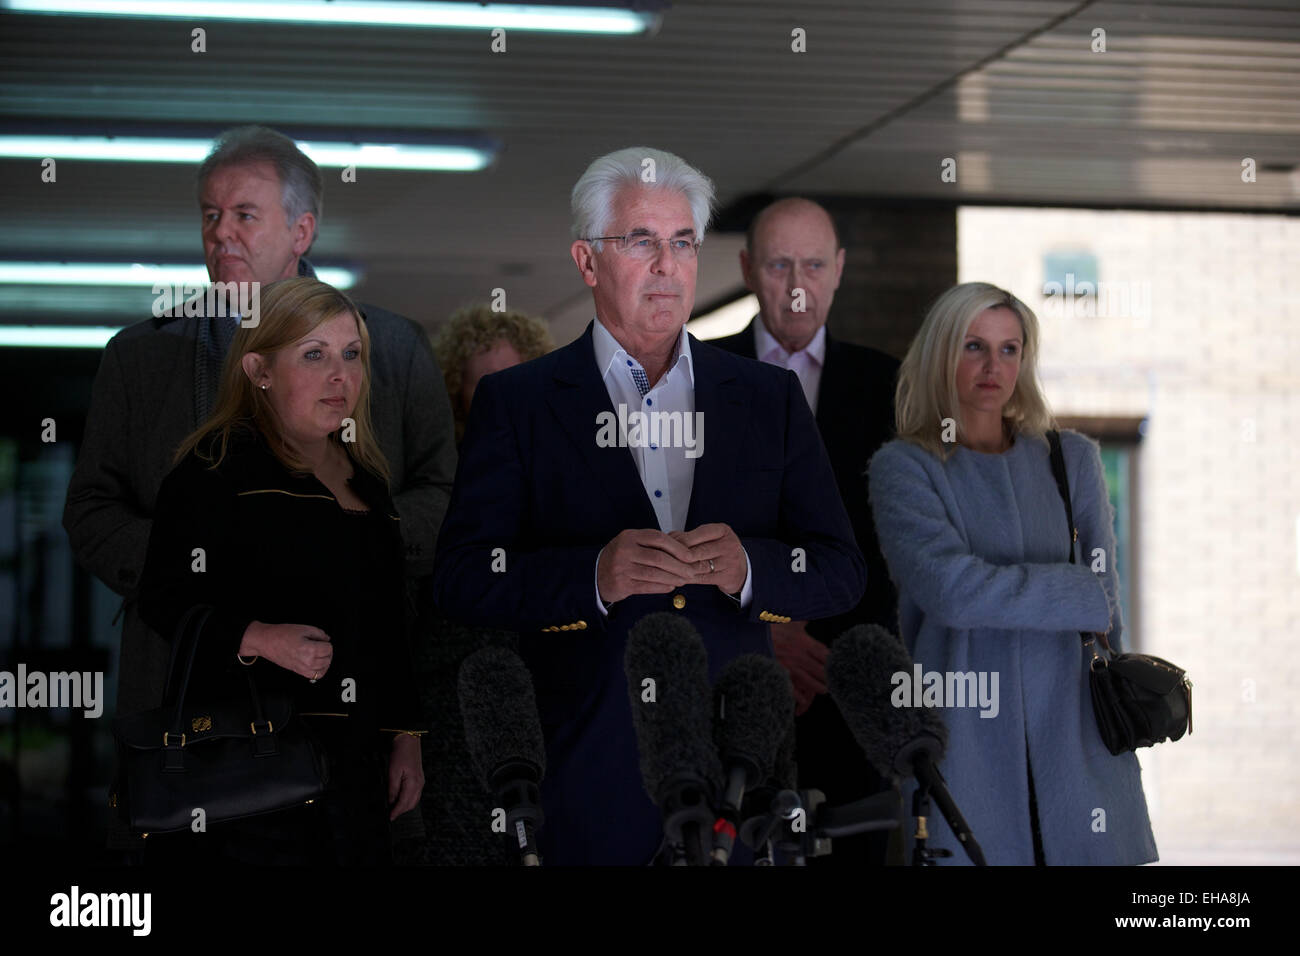 UNITED KINGDOM, London : Publicist Max Clifford arrives at Southwark Crown Court in central London, The jury has retired to consider the 11 charges of indecent assault against Mr Clifford on April 23, 2014. Stock Photo